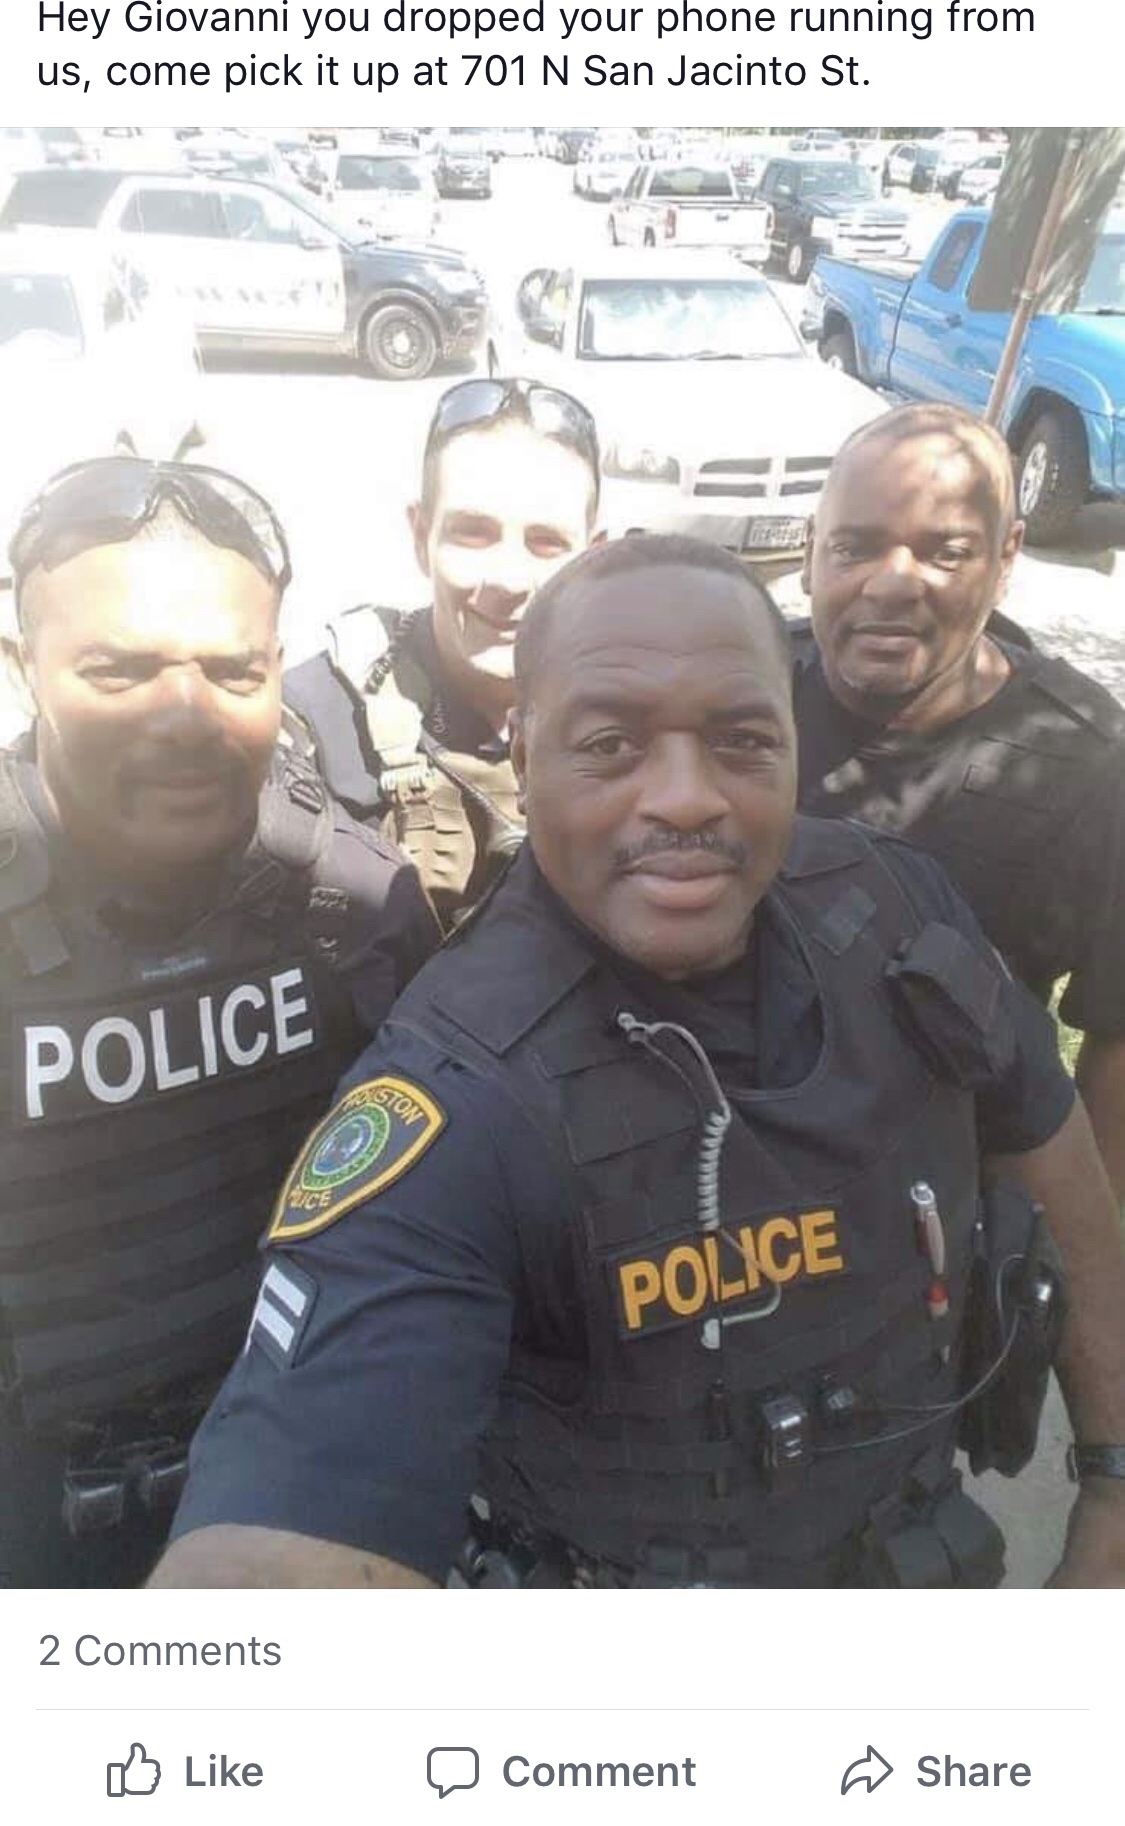 police selfie - Hey Giovanni you dropped your phone running from us, come pick it up at 701 N San Jacinto St. Police 4610 Police 2 Comment